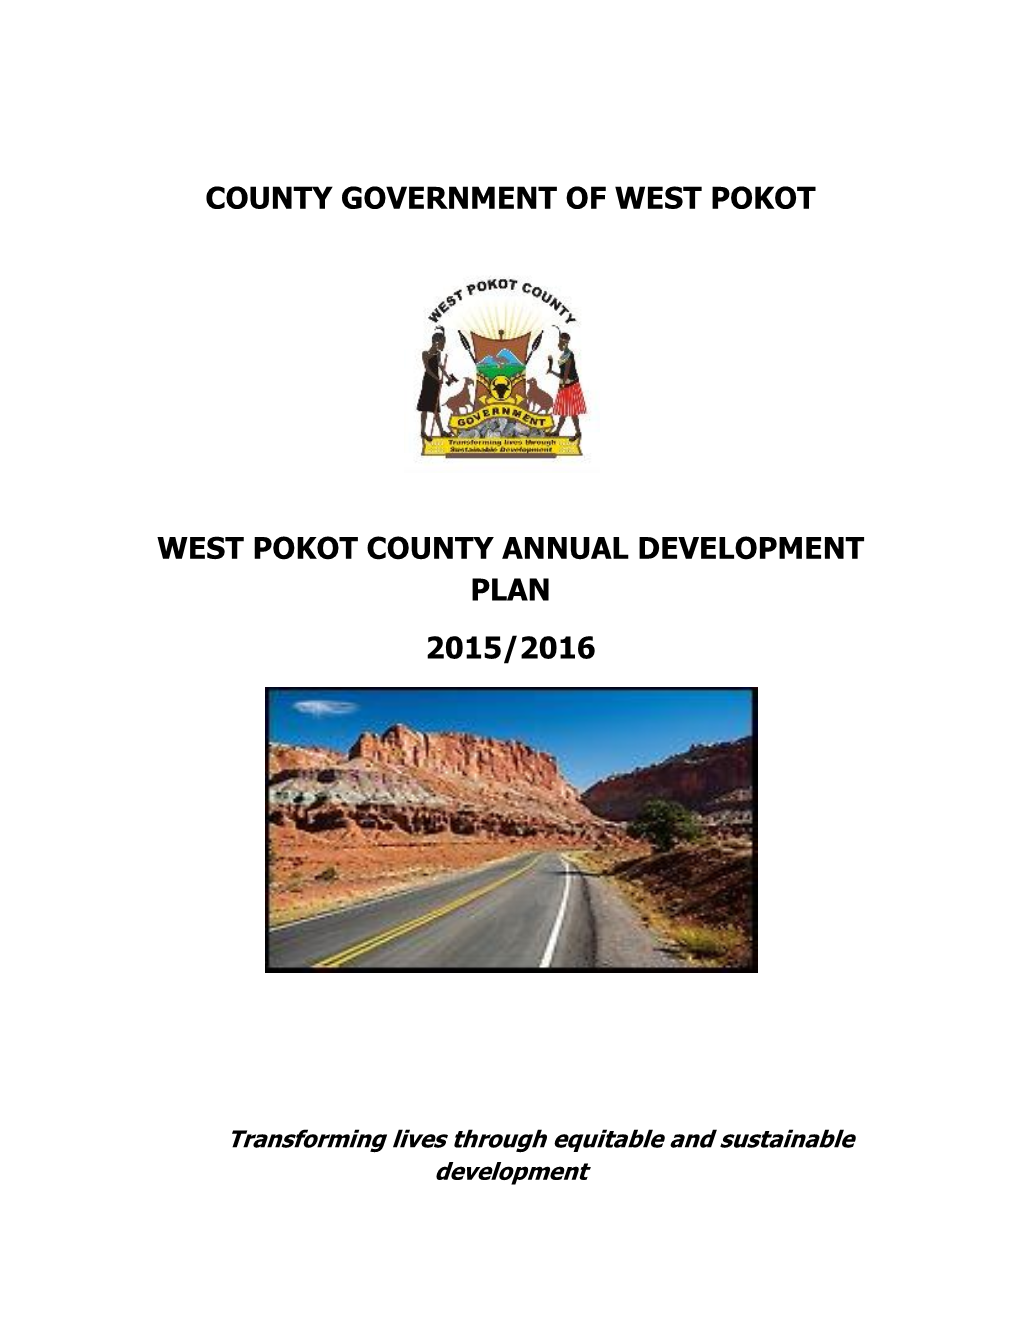 County Government of West Pokot West Pokot County Annual Development